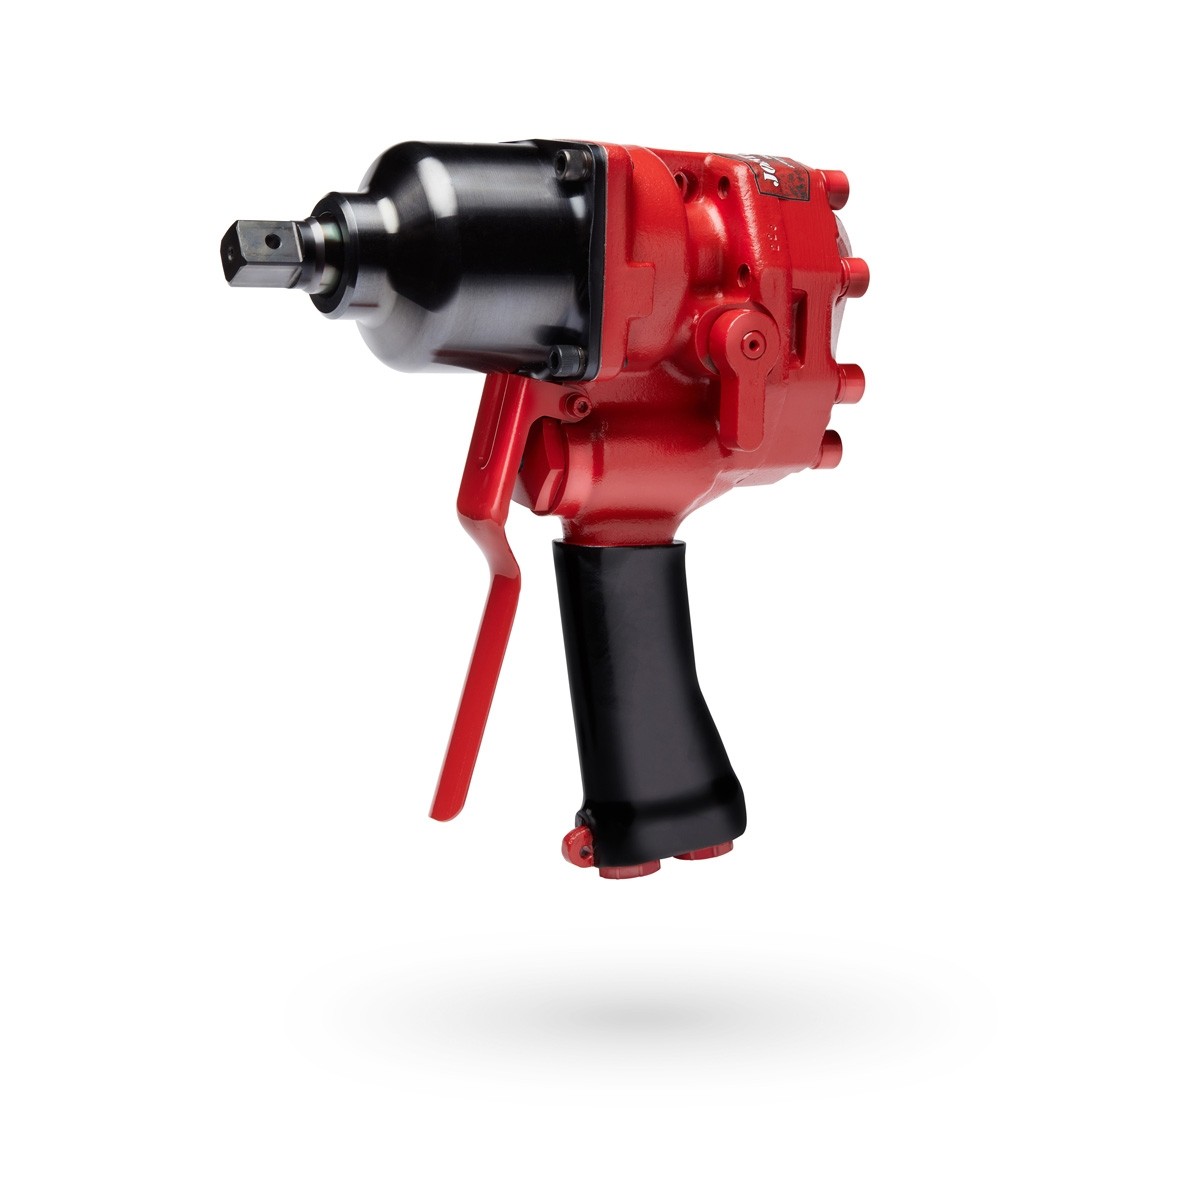 Joint Zone 12IW 3/4" Hydraulic Impact Wrench (U/W Capable)